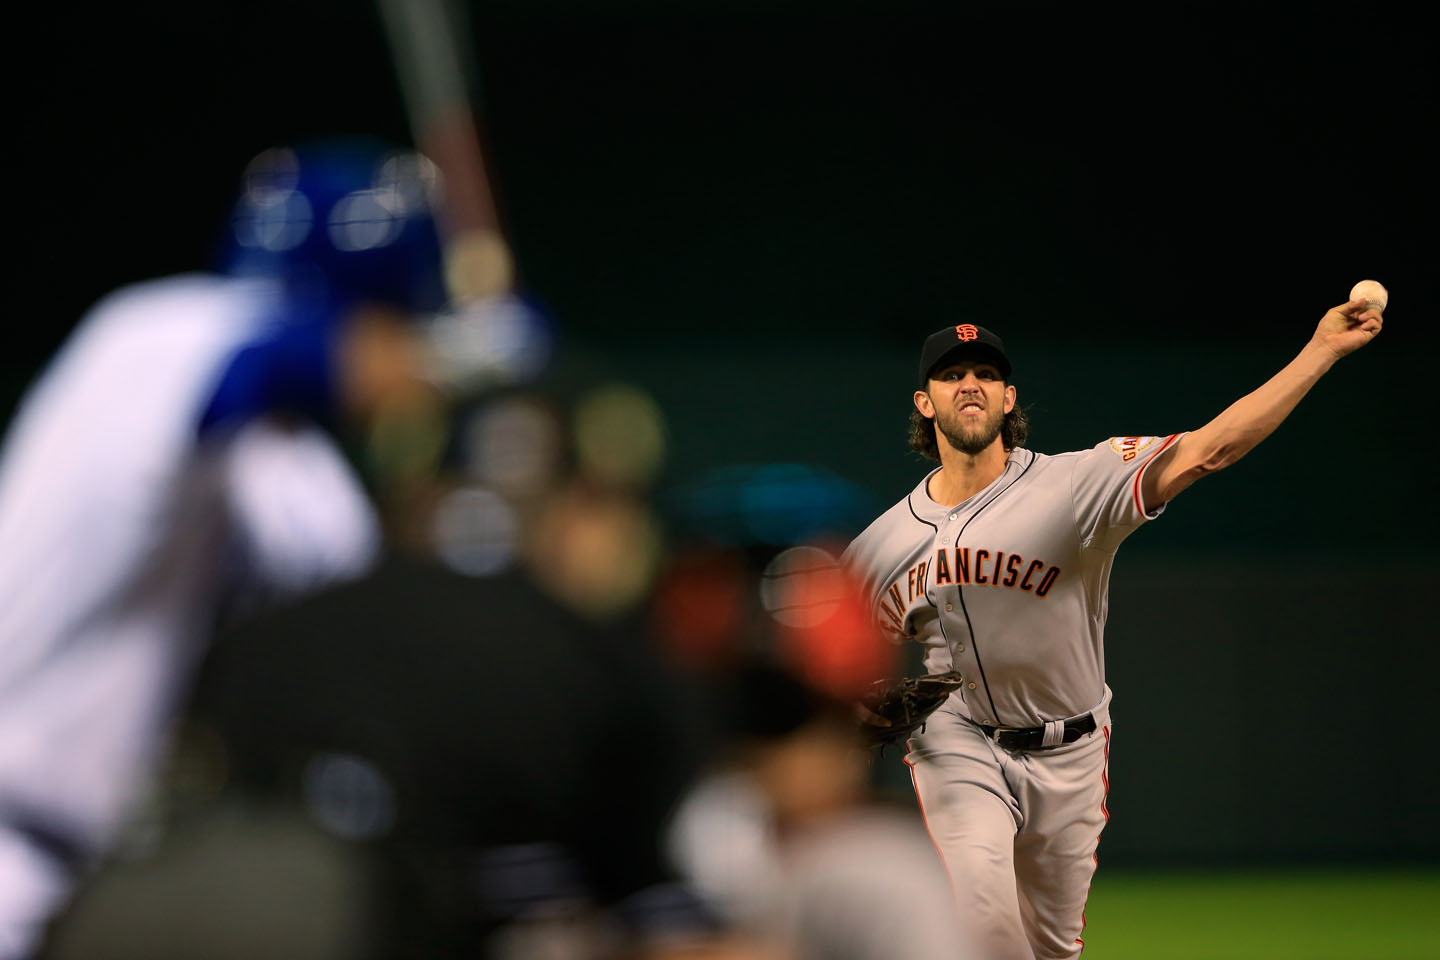 Madison Bumgarner pitches his way out of a bases-loaded jam in the bottom of the third inning. (Jamie Squire/Getty Images)